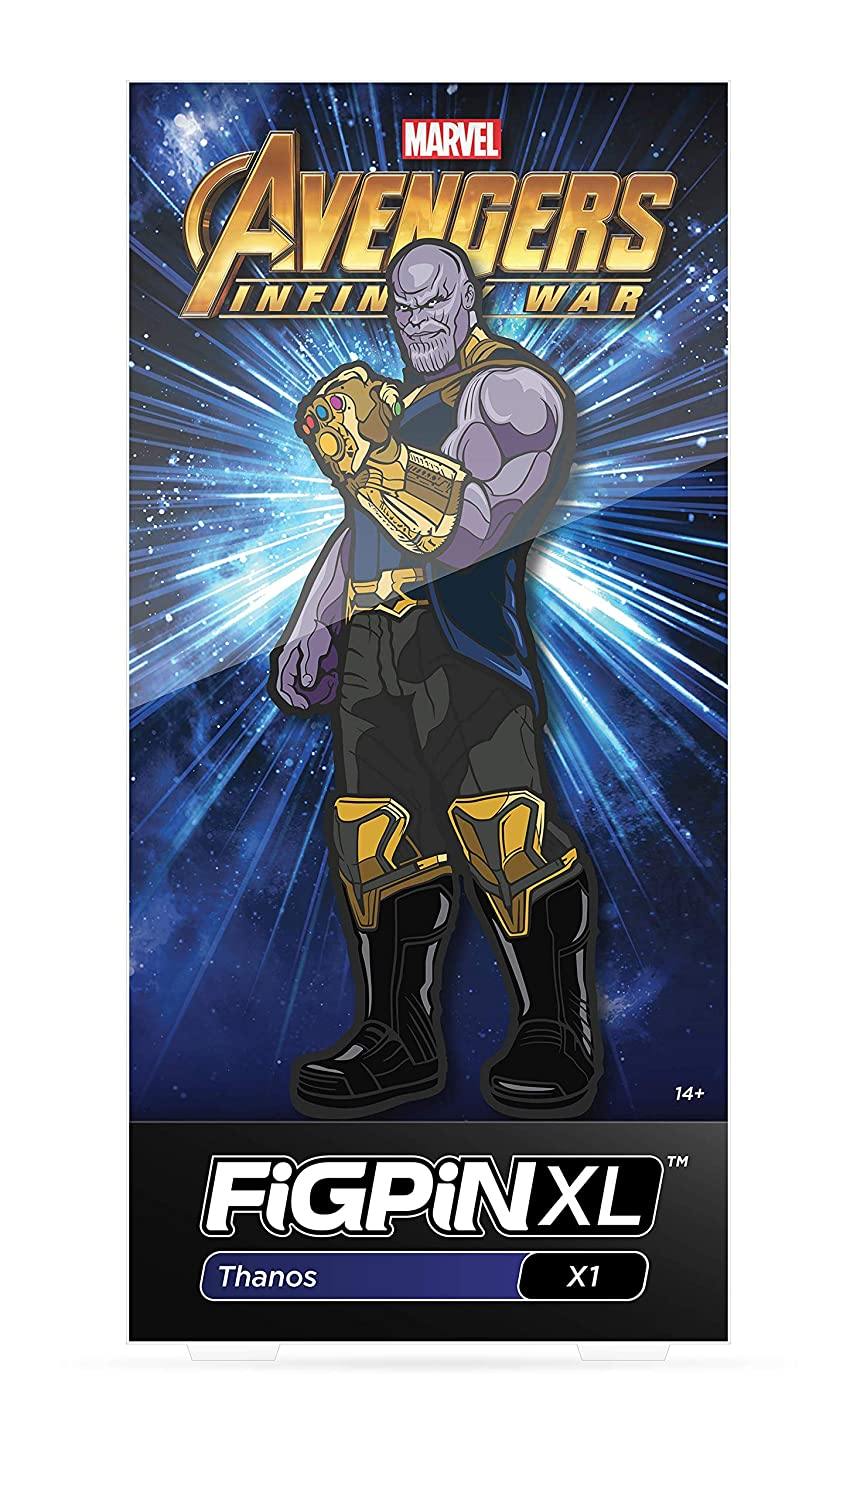 FiGPiN Marvel Avengers Infinity War Thanos XL Collectible Pin with Premium Display Case